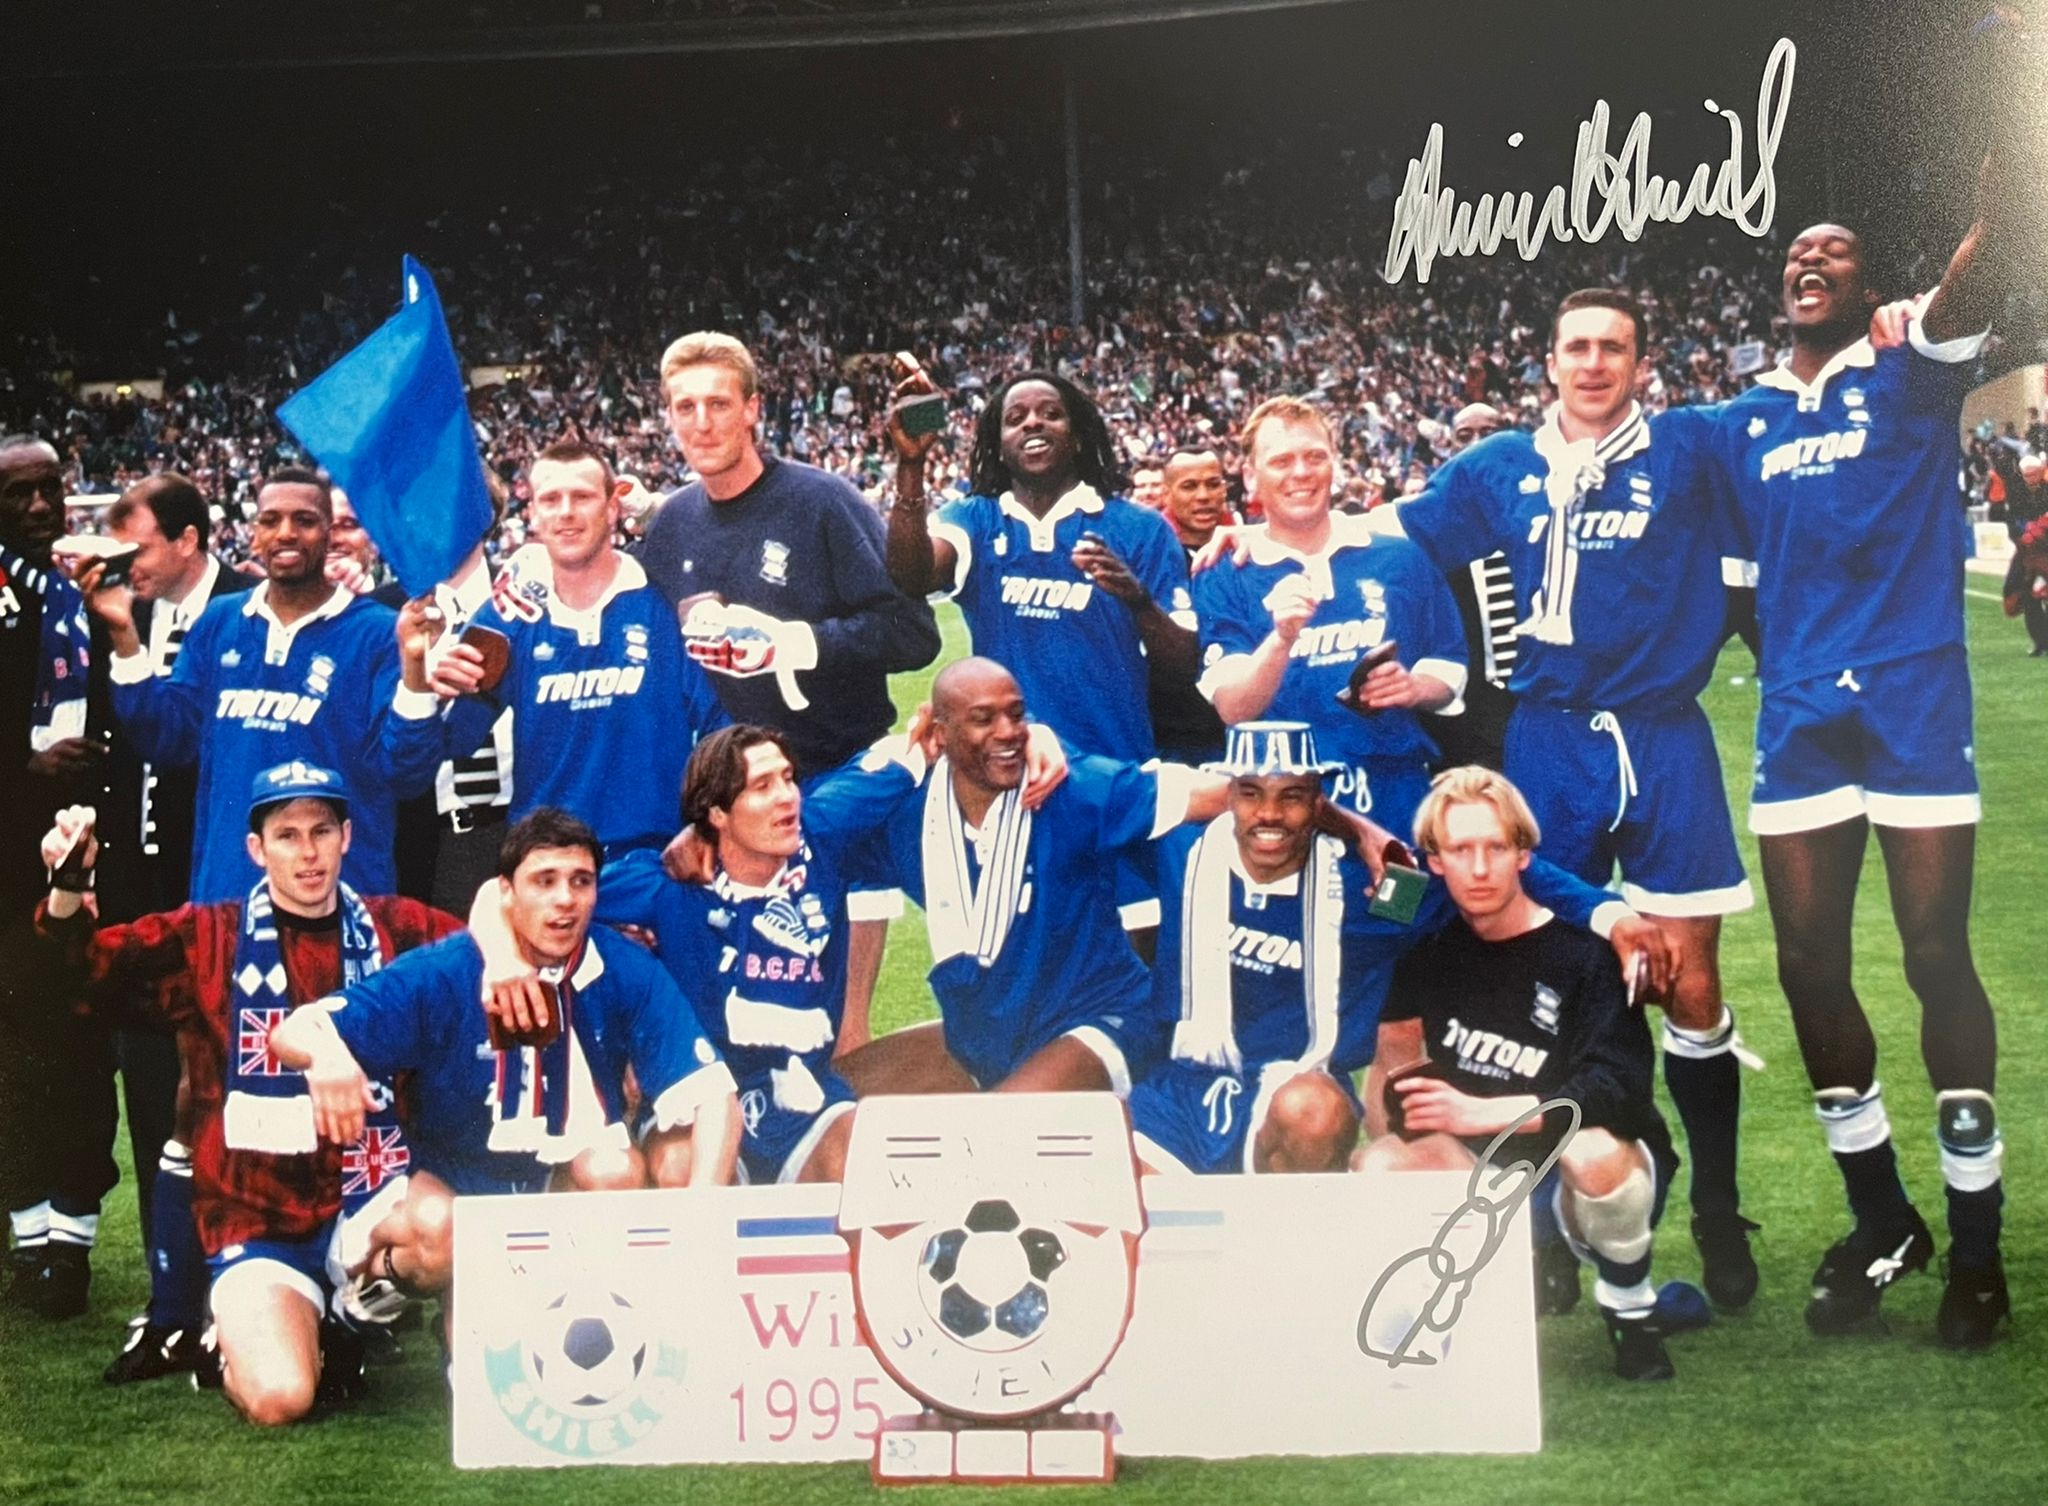 Birmingham City 16 x 12" 1995 Auto Windscreens Trophy Photo Signed by Liam Daish and Paul Tait